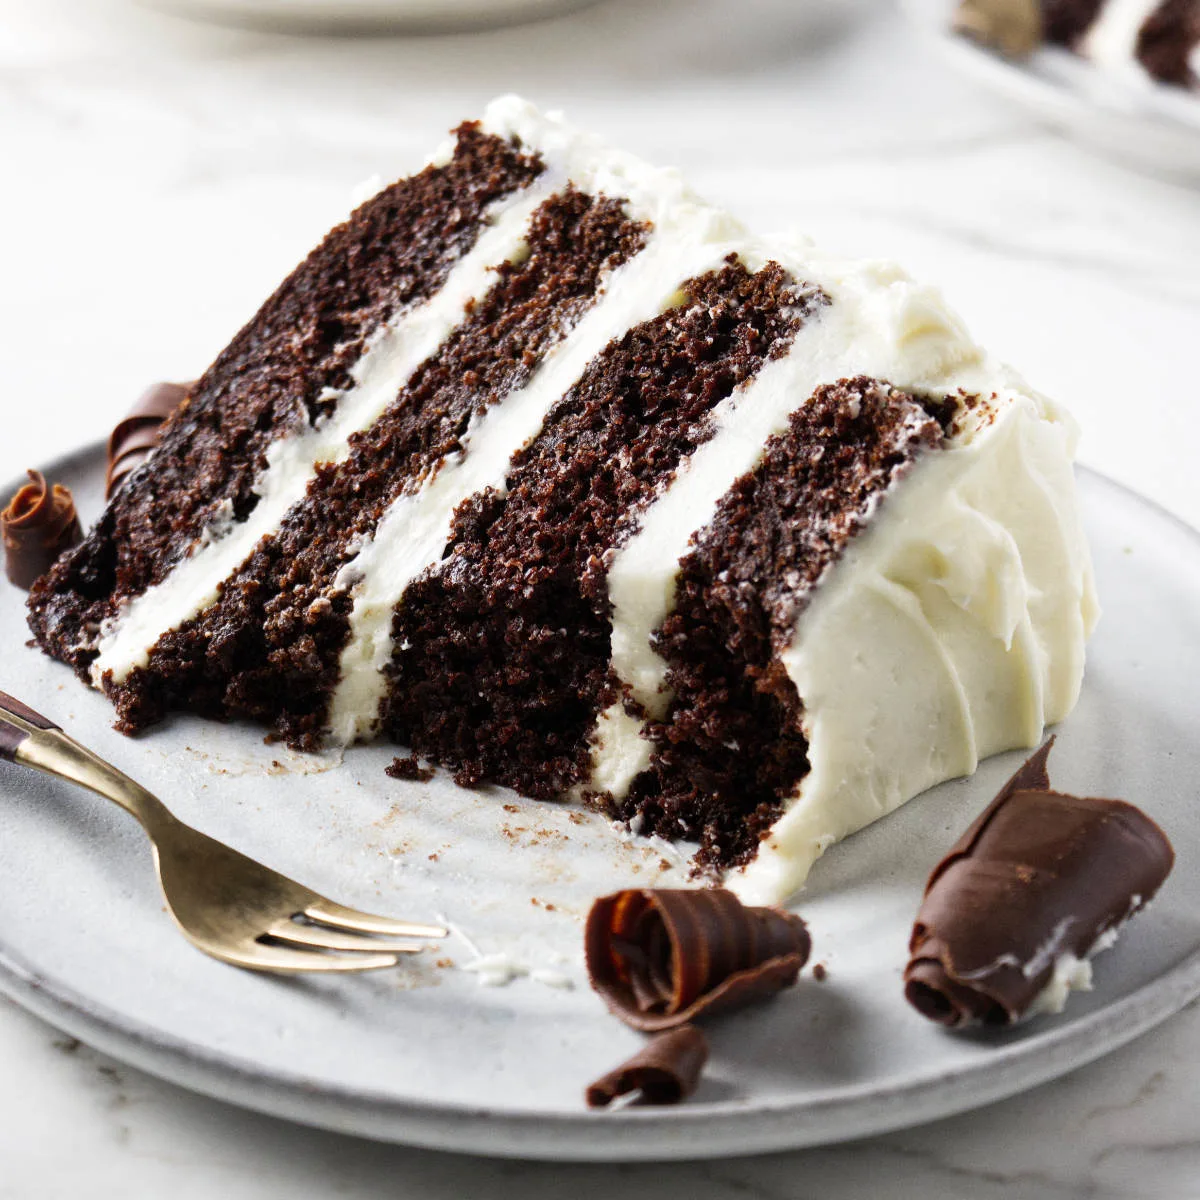 A cream cheese frosting chocolate cake on a plate with a fork and chocolate curls.